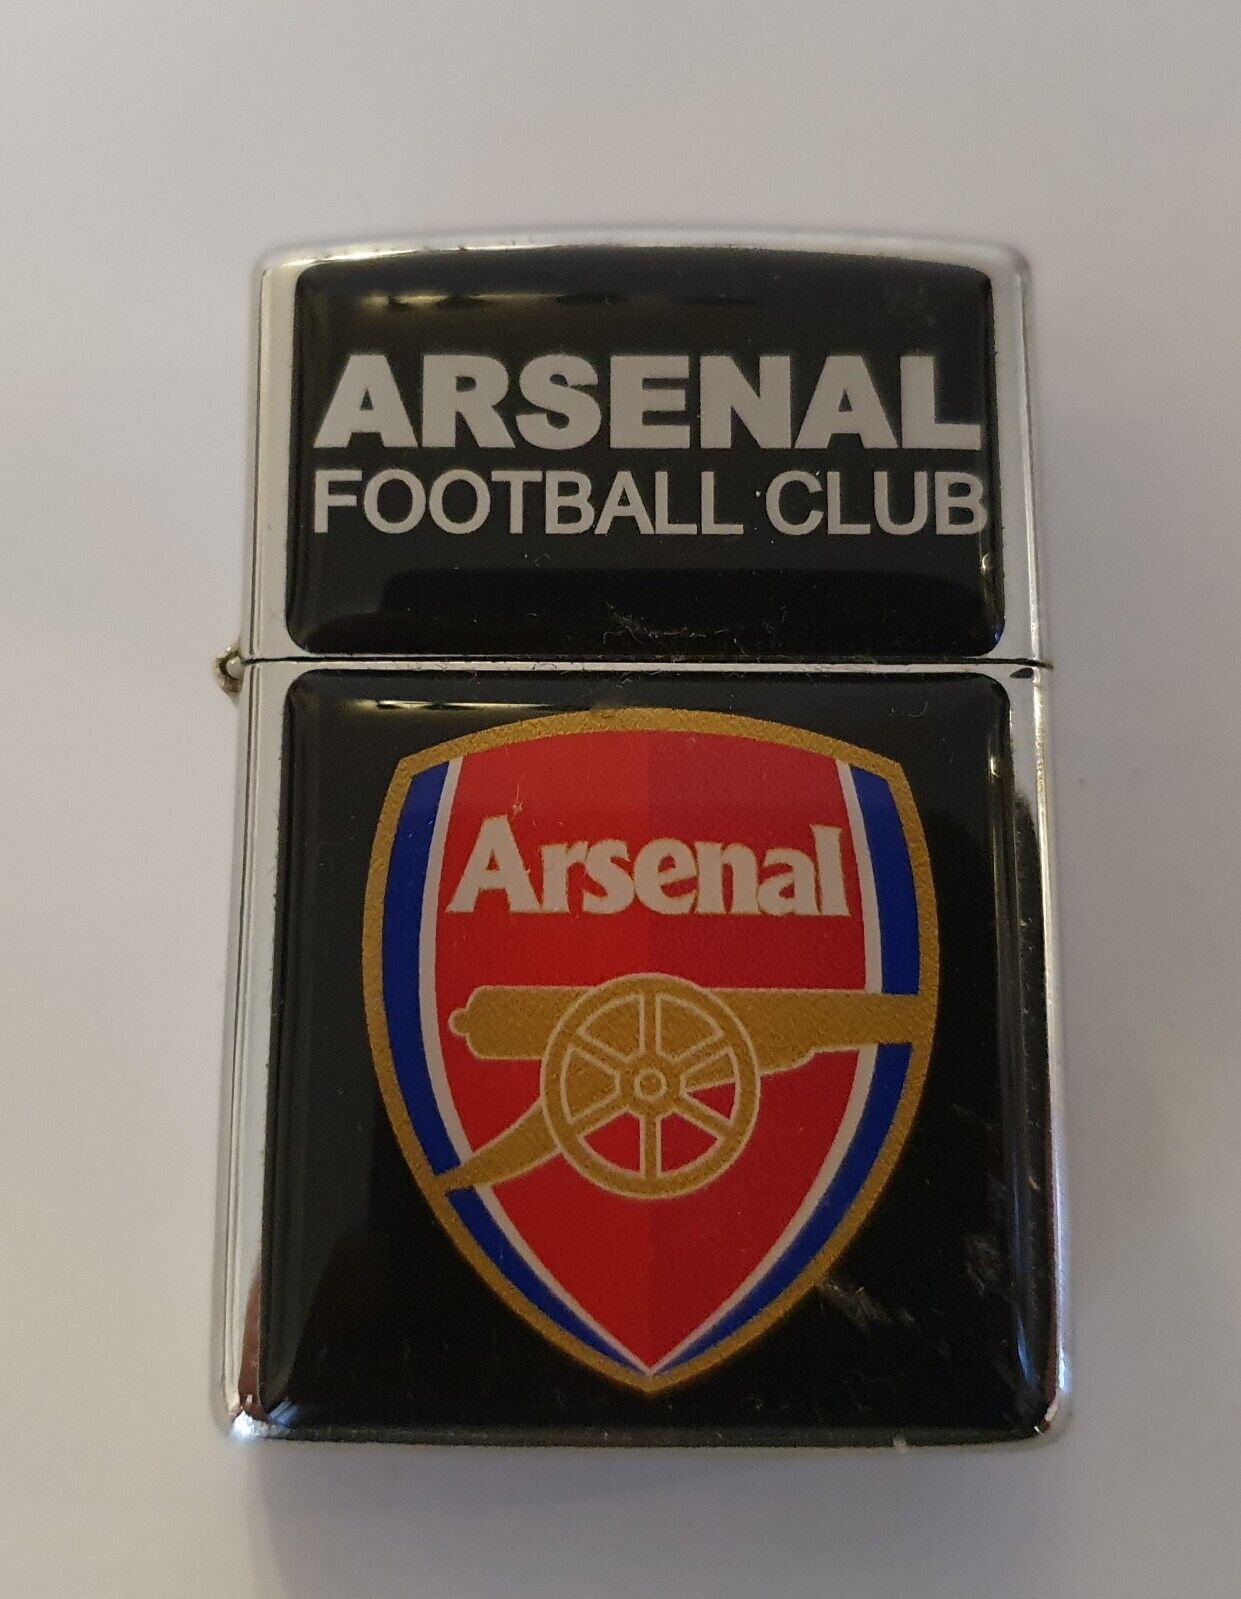 ARSENAL FC Gasoline Lighter with Club Coat of Arms Metal Limited Edition 